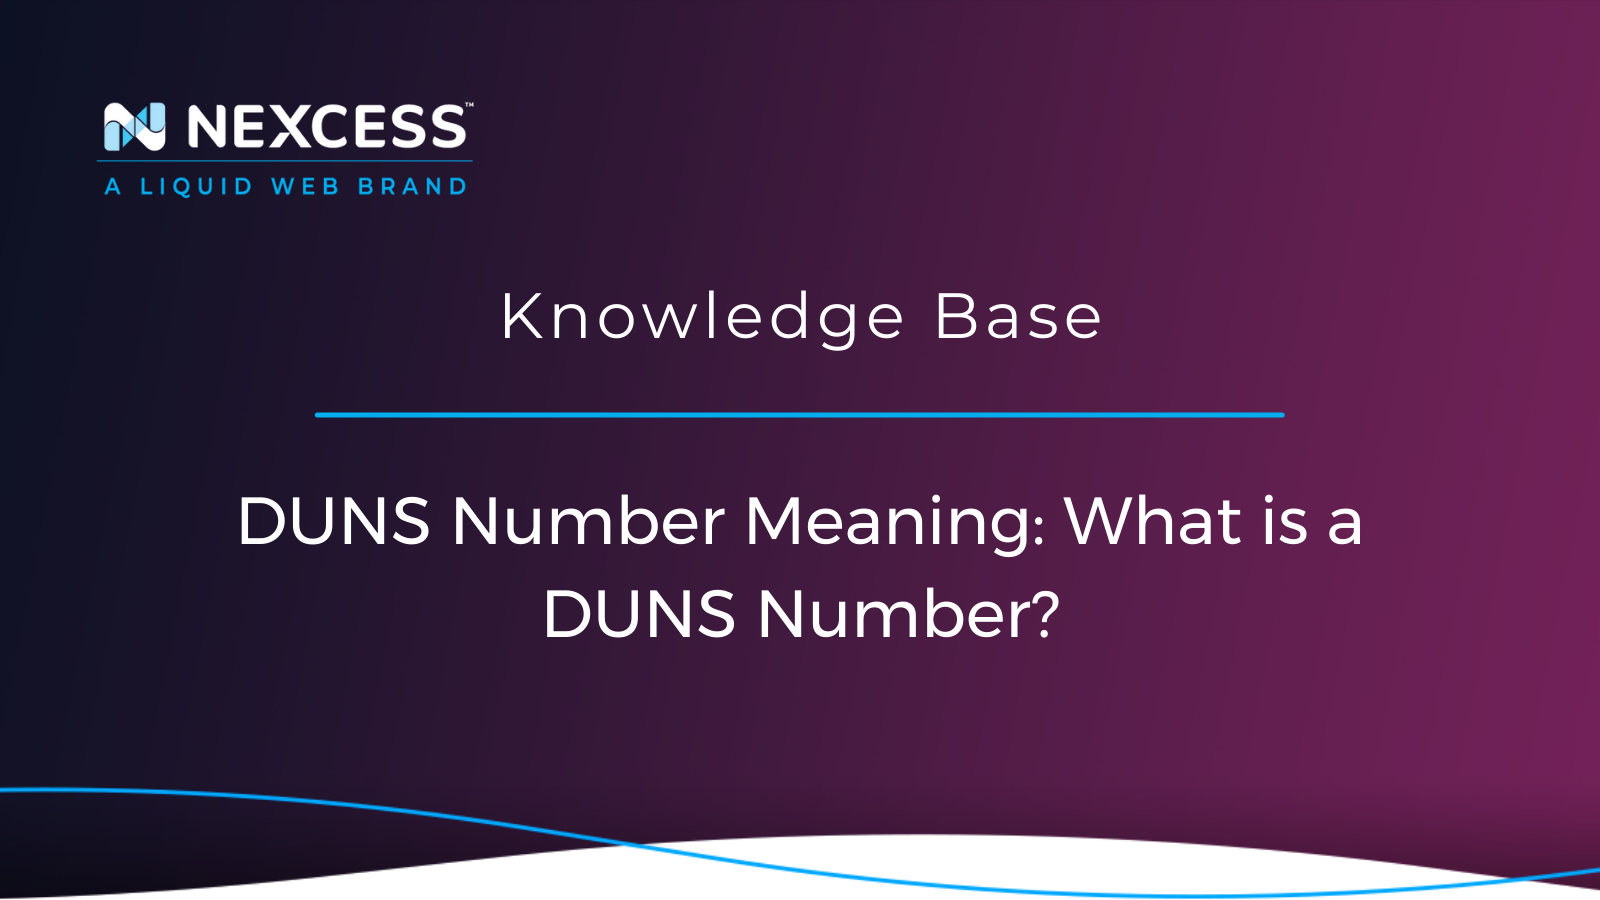 DUNS Number Meaning: What is a DUNS Number?